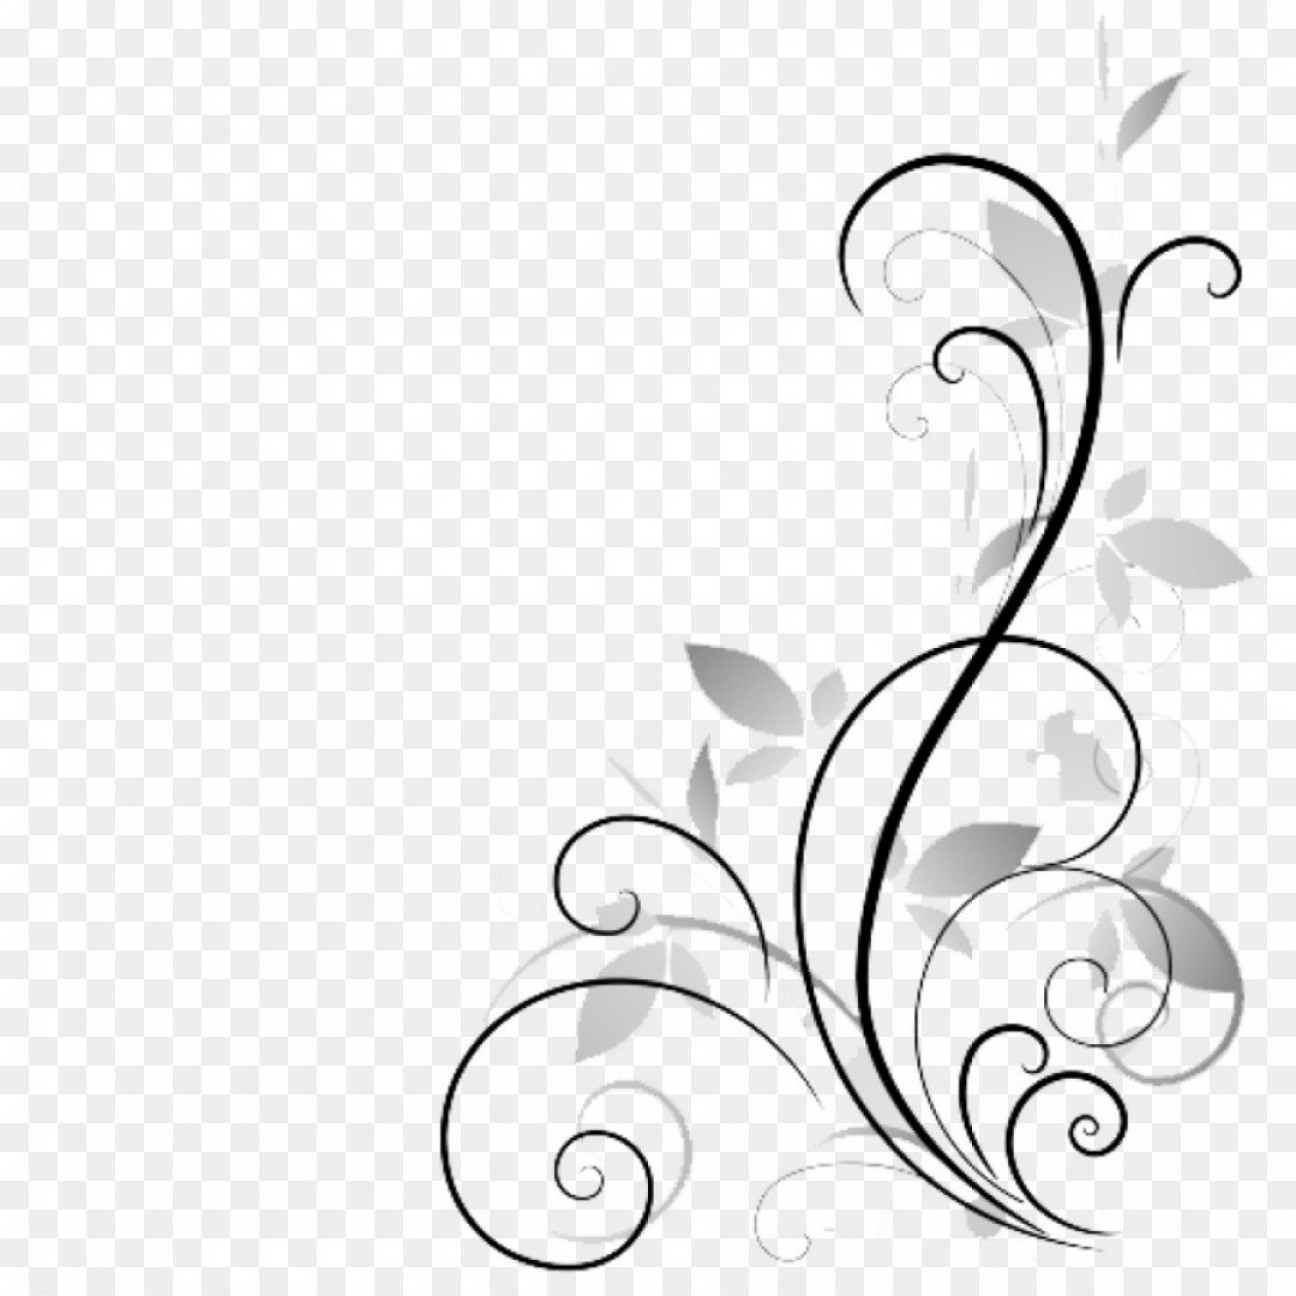 Download Vines Vector Png at Vectorified.com | Collection of Vines ...